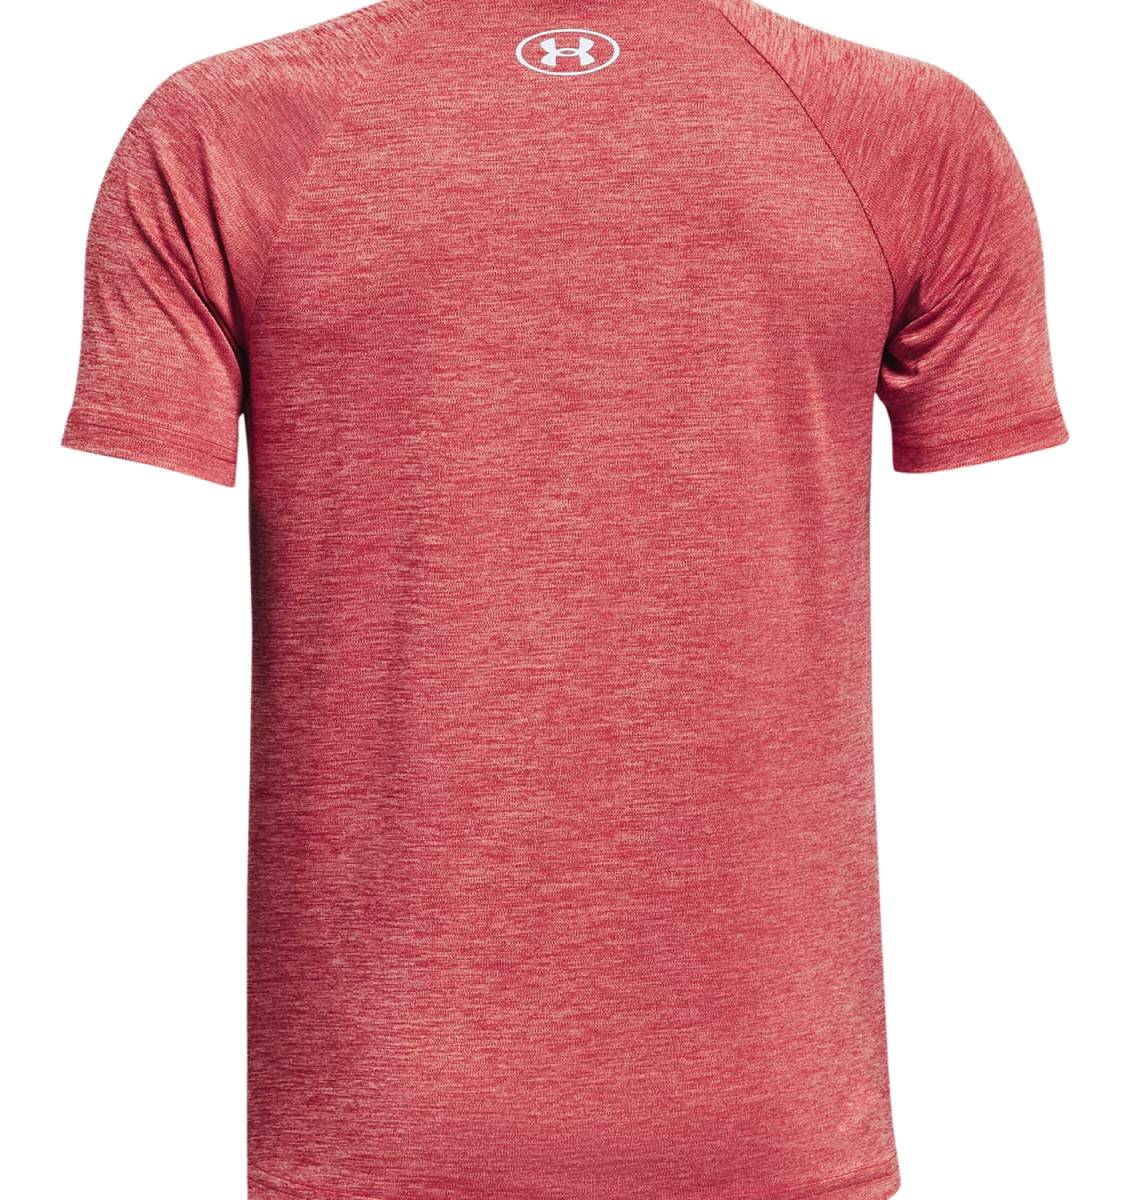 Under Armour UA TECH 2.0 SS TEE - Basic T-shirt - red/graphite/red 